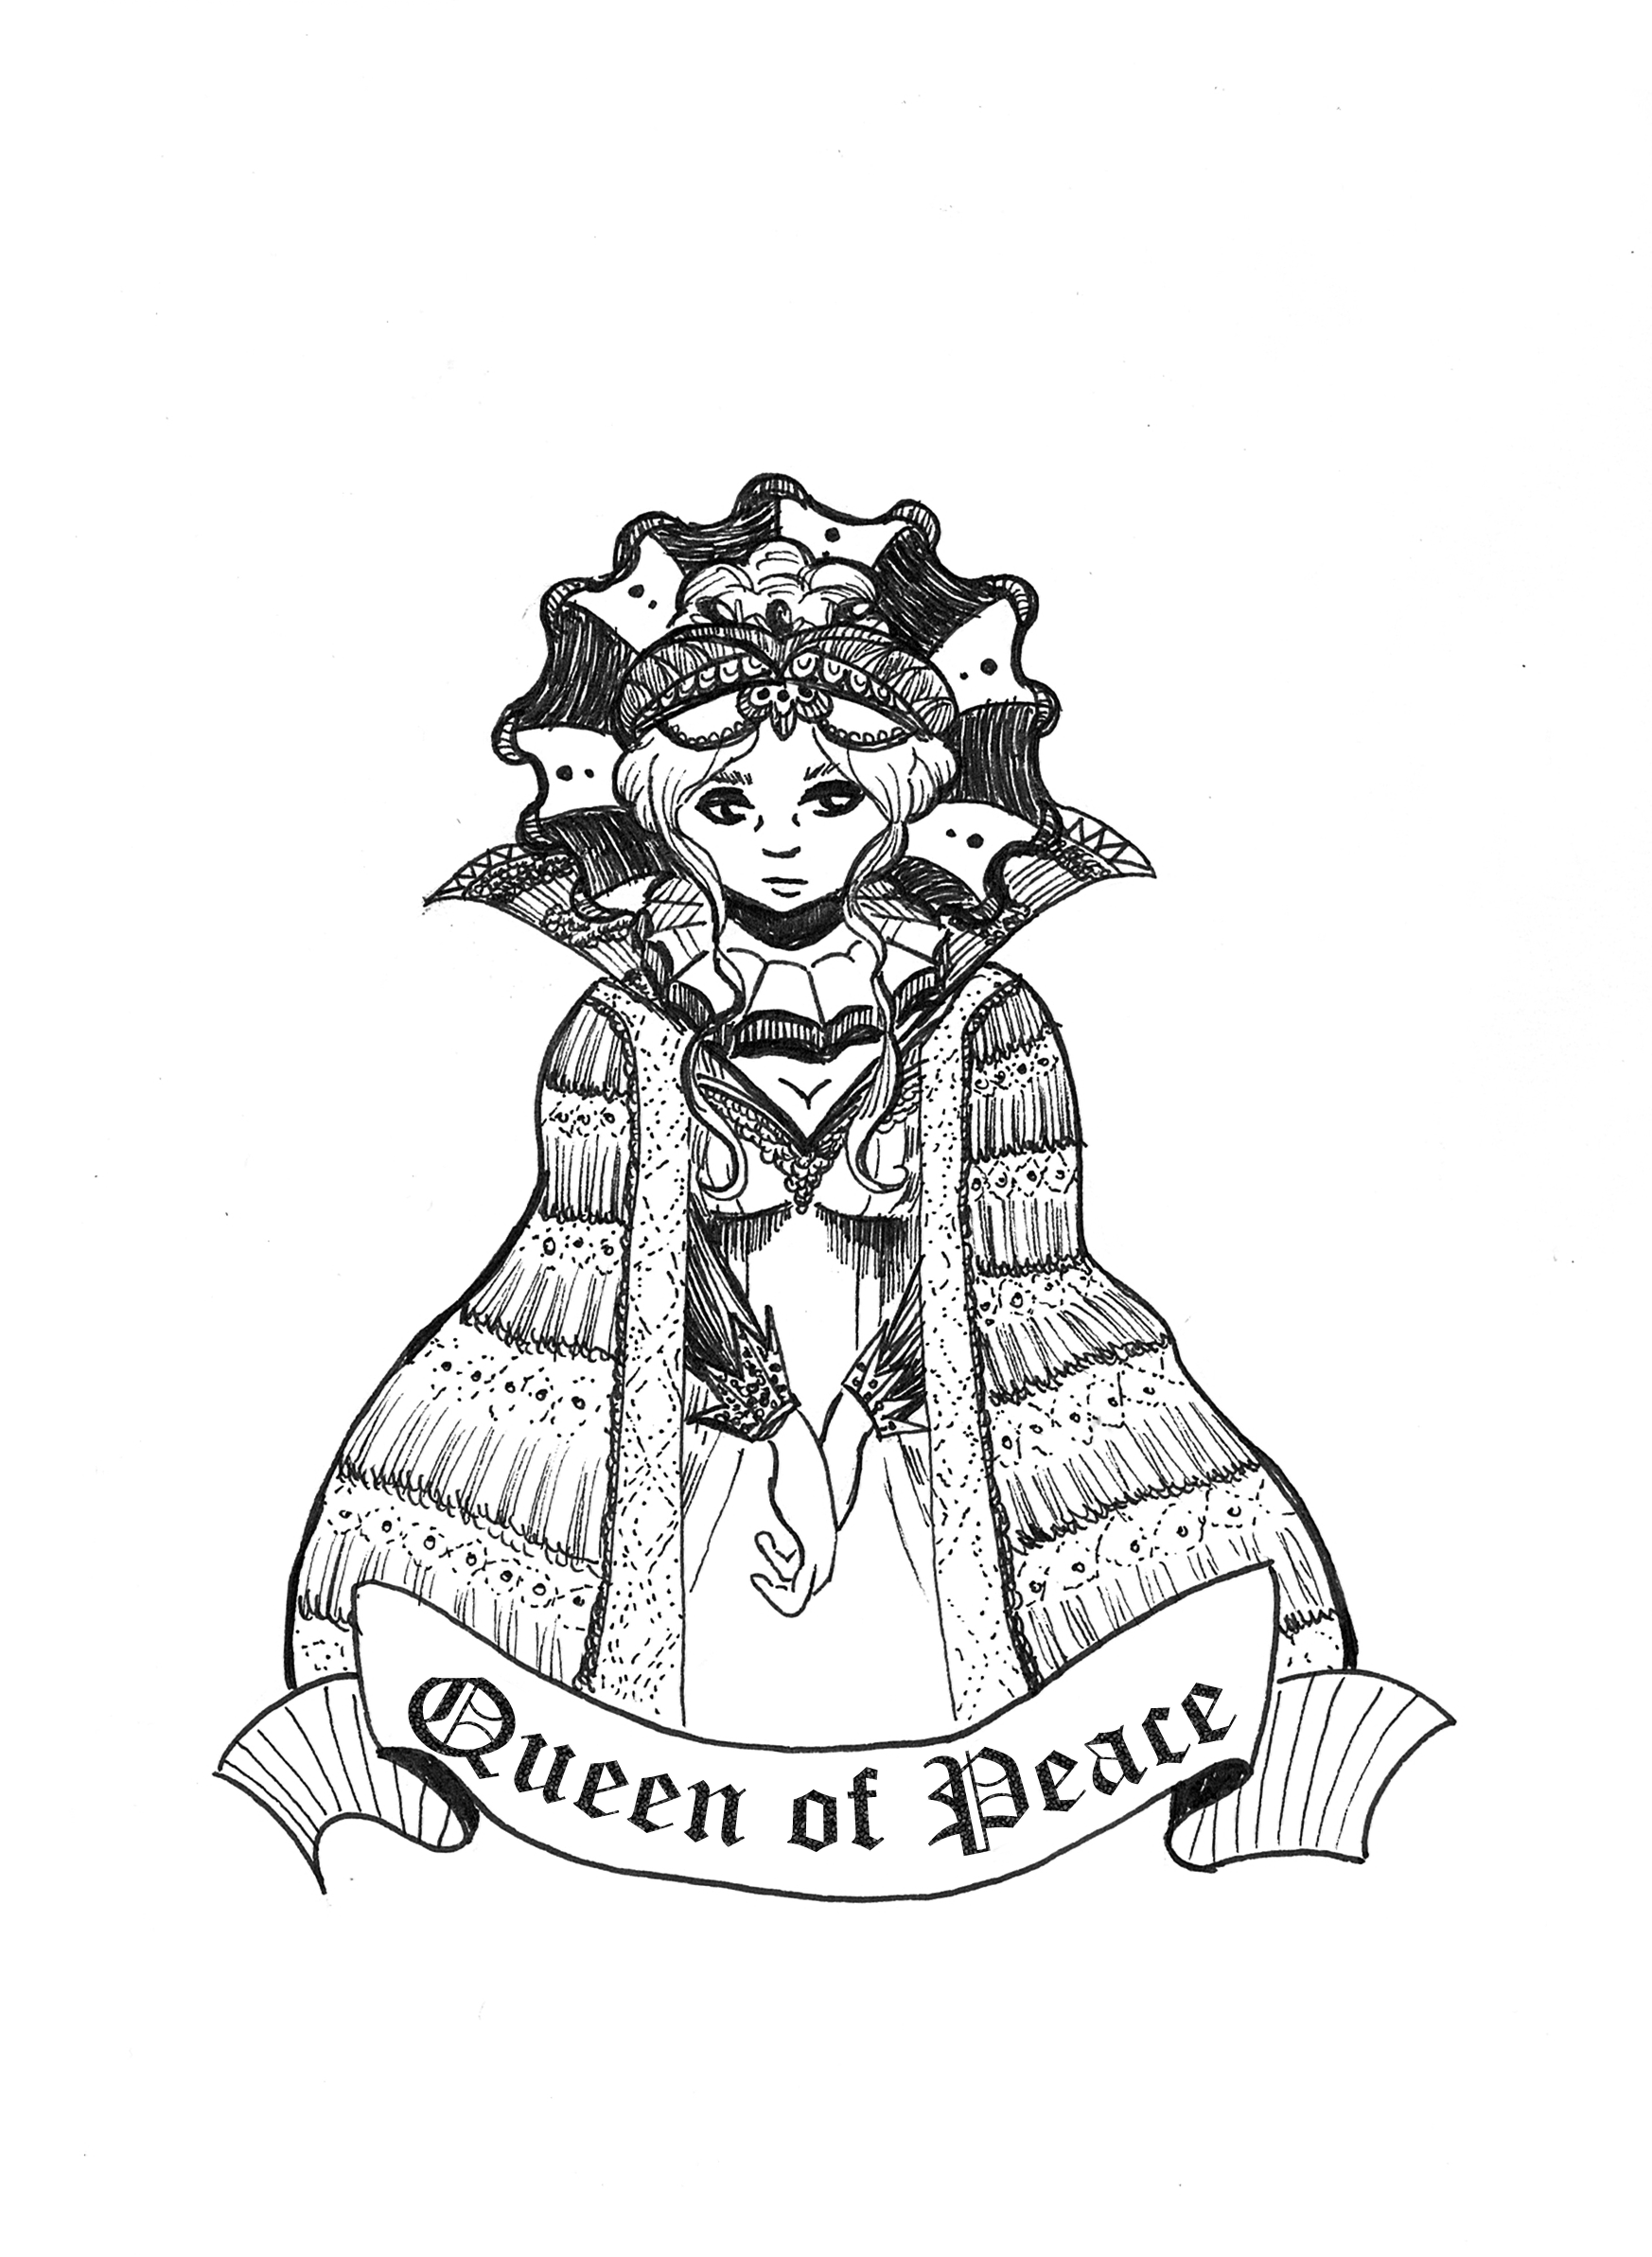 Daily Sketch - Queen of Peace